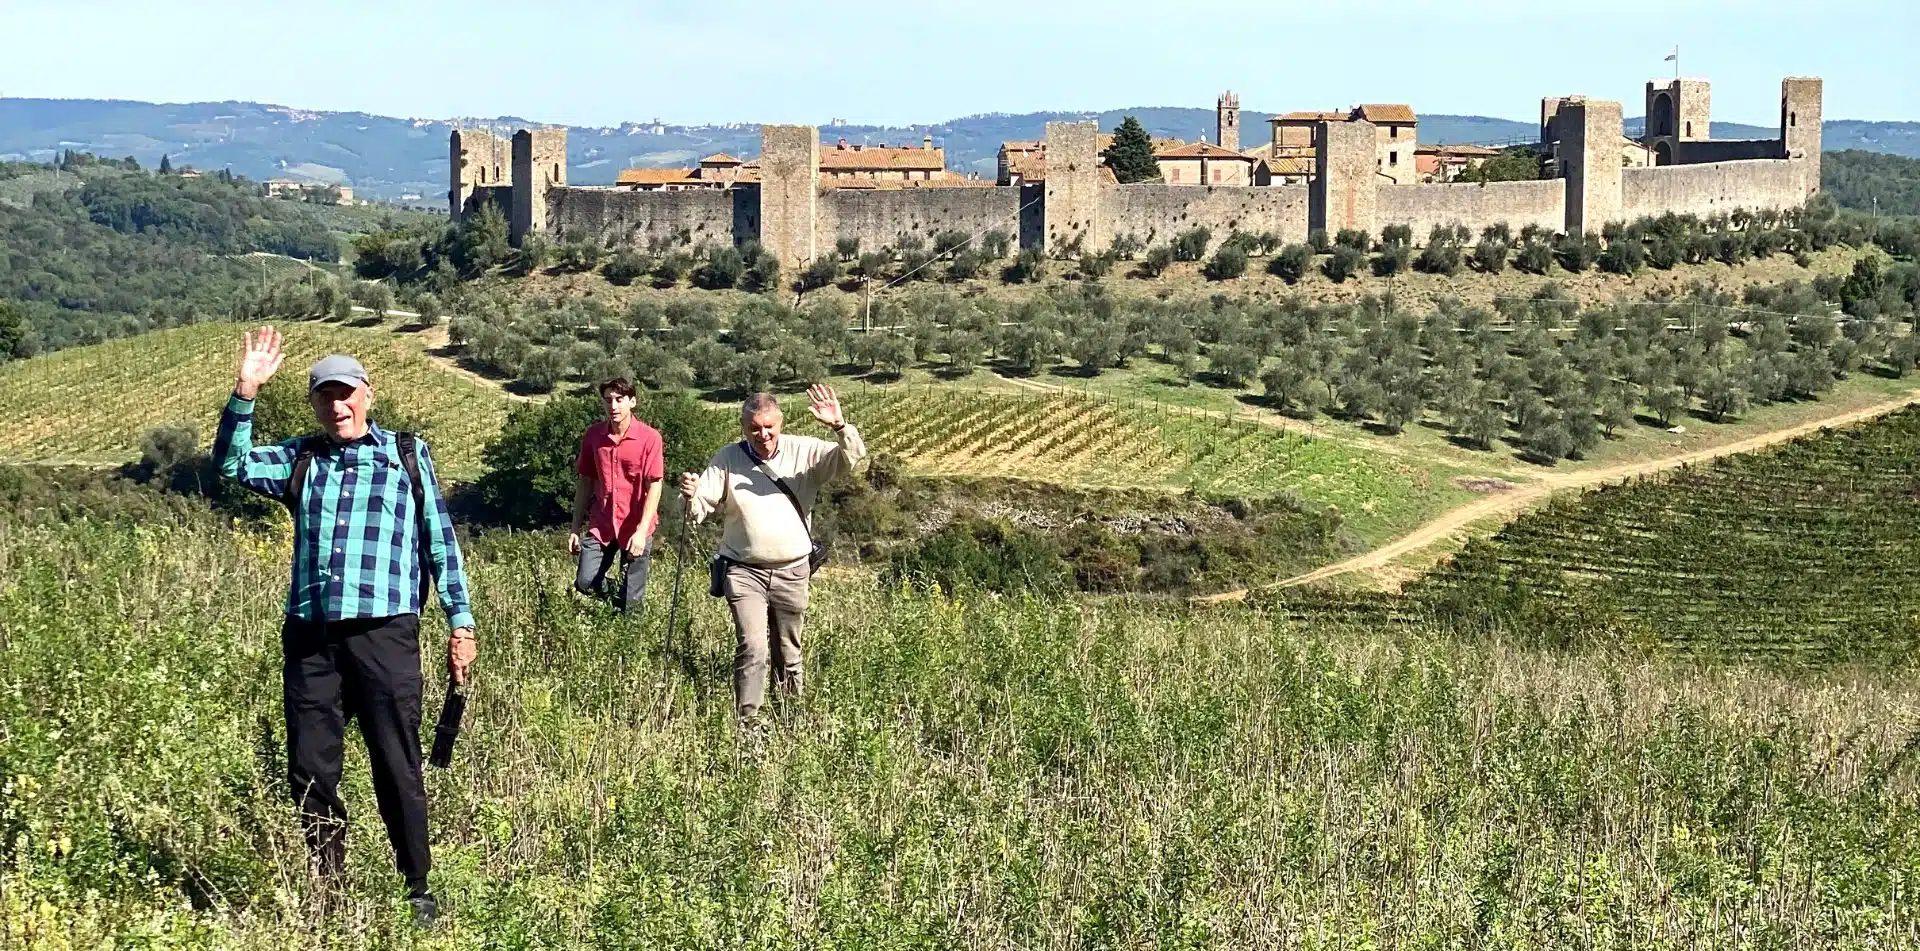 Travelers walking to Monteriggioni, a walled town in Tuscany, Italy